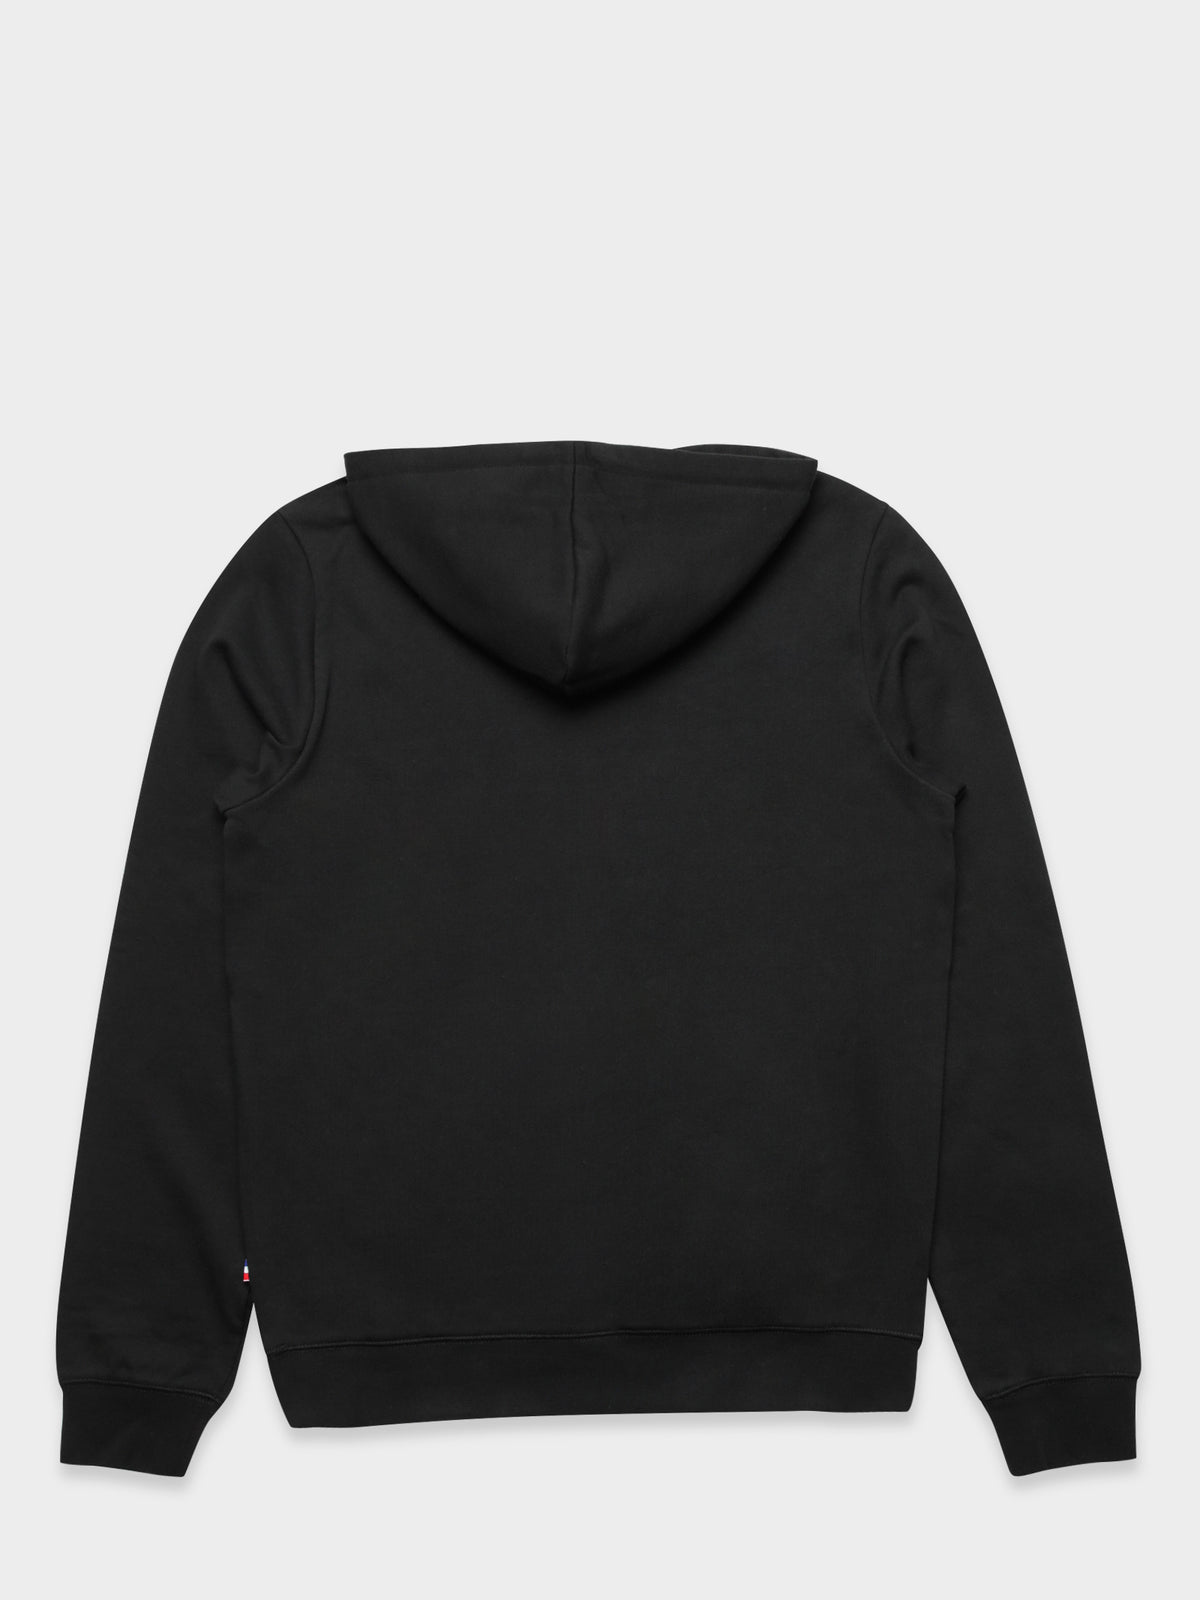 Labrit Hooded Sweater in Black